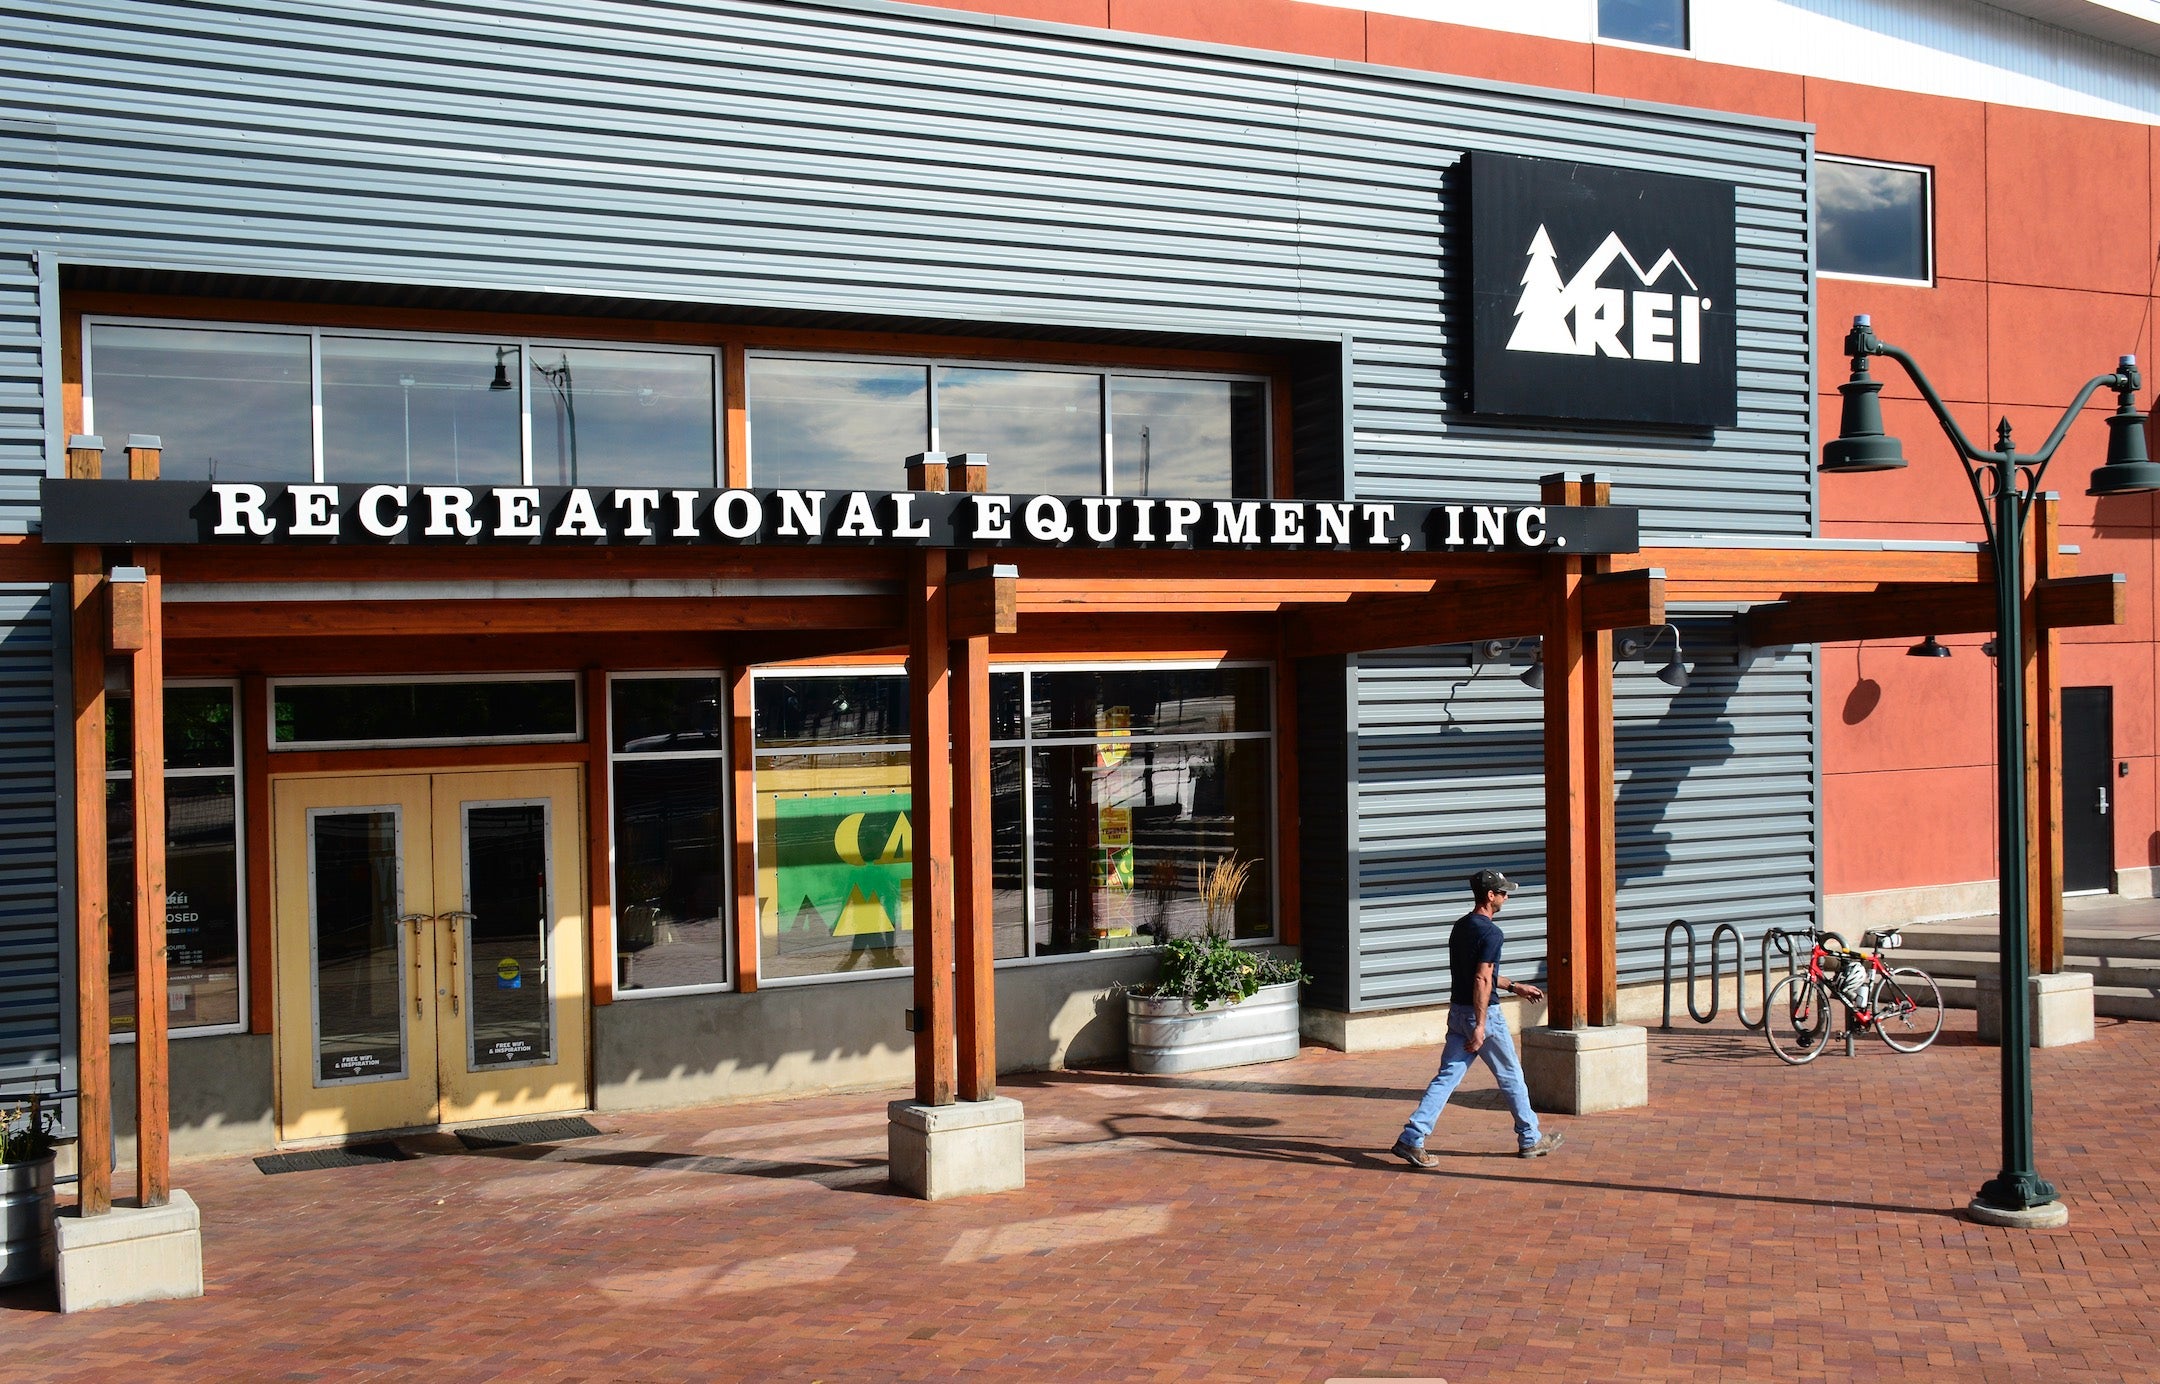 REI to Open First 'Small-Format' Neighborhood Store This Fall